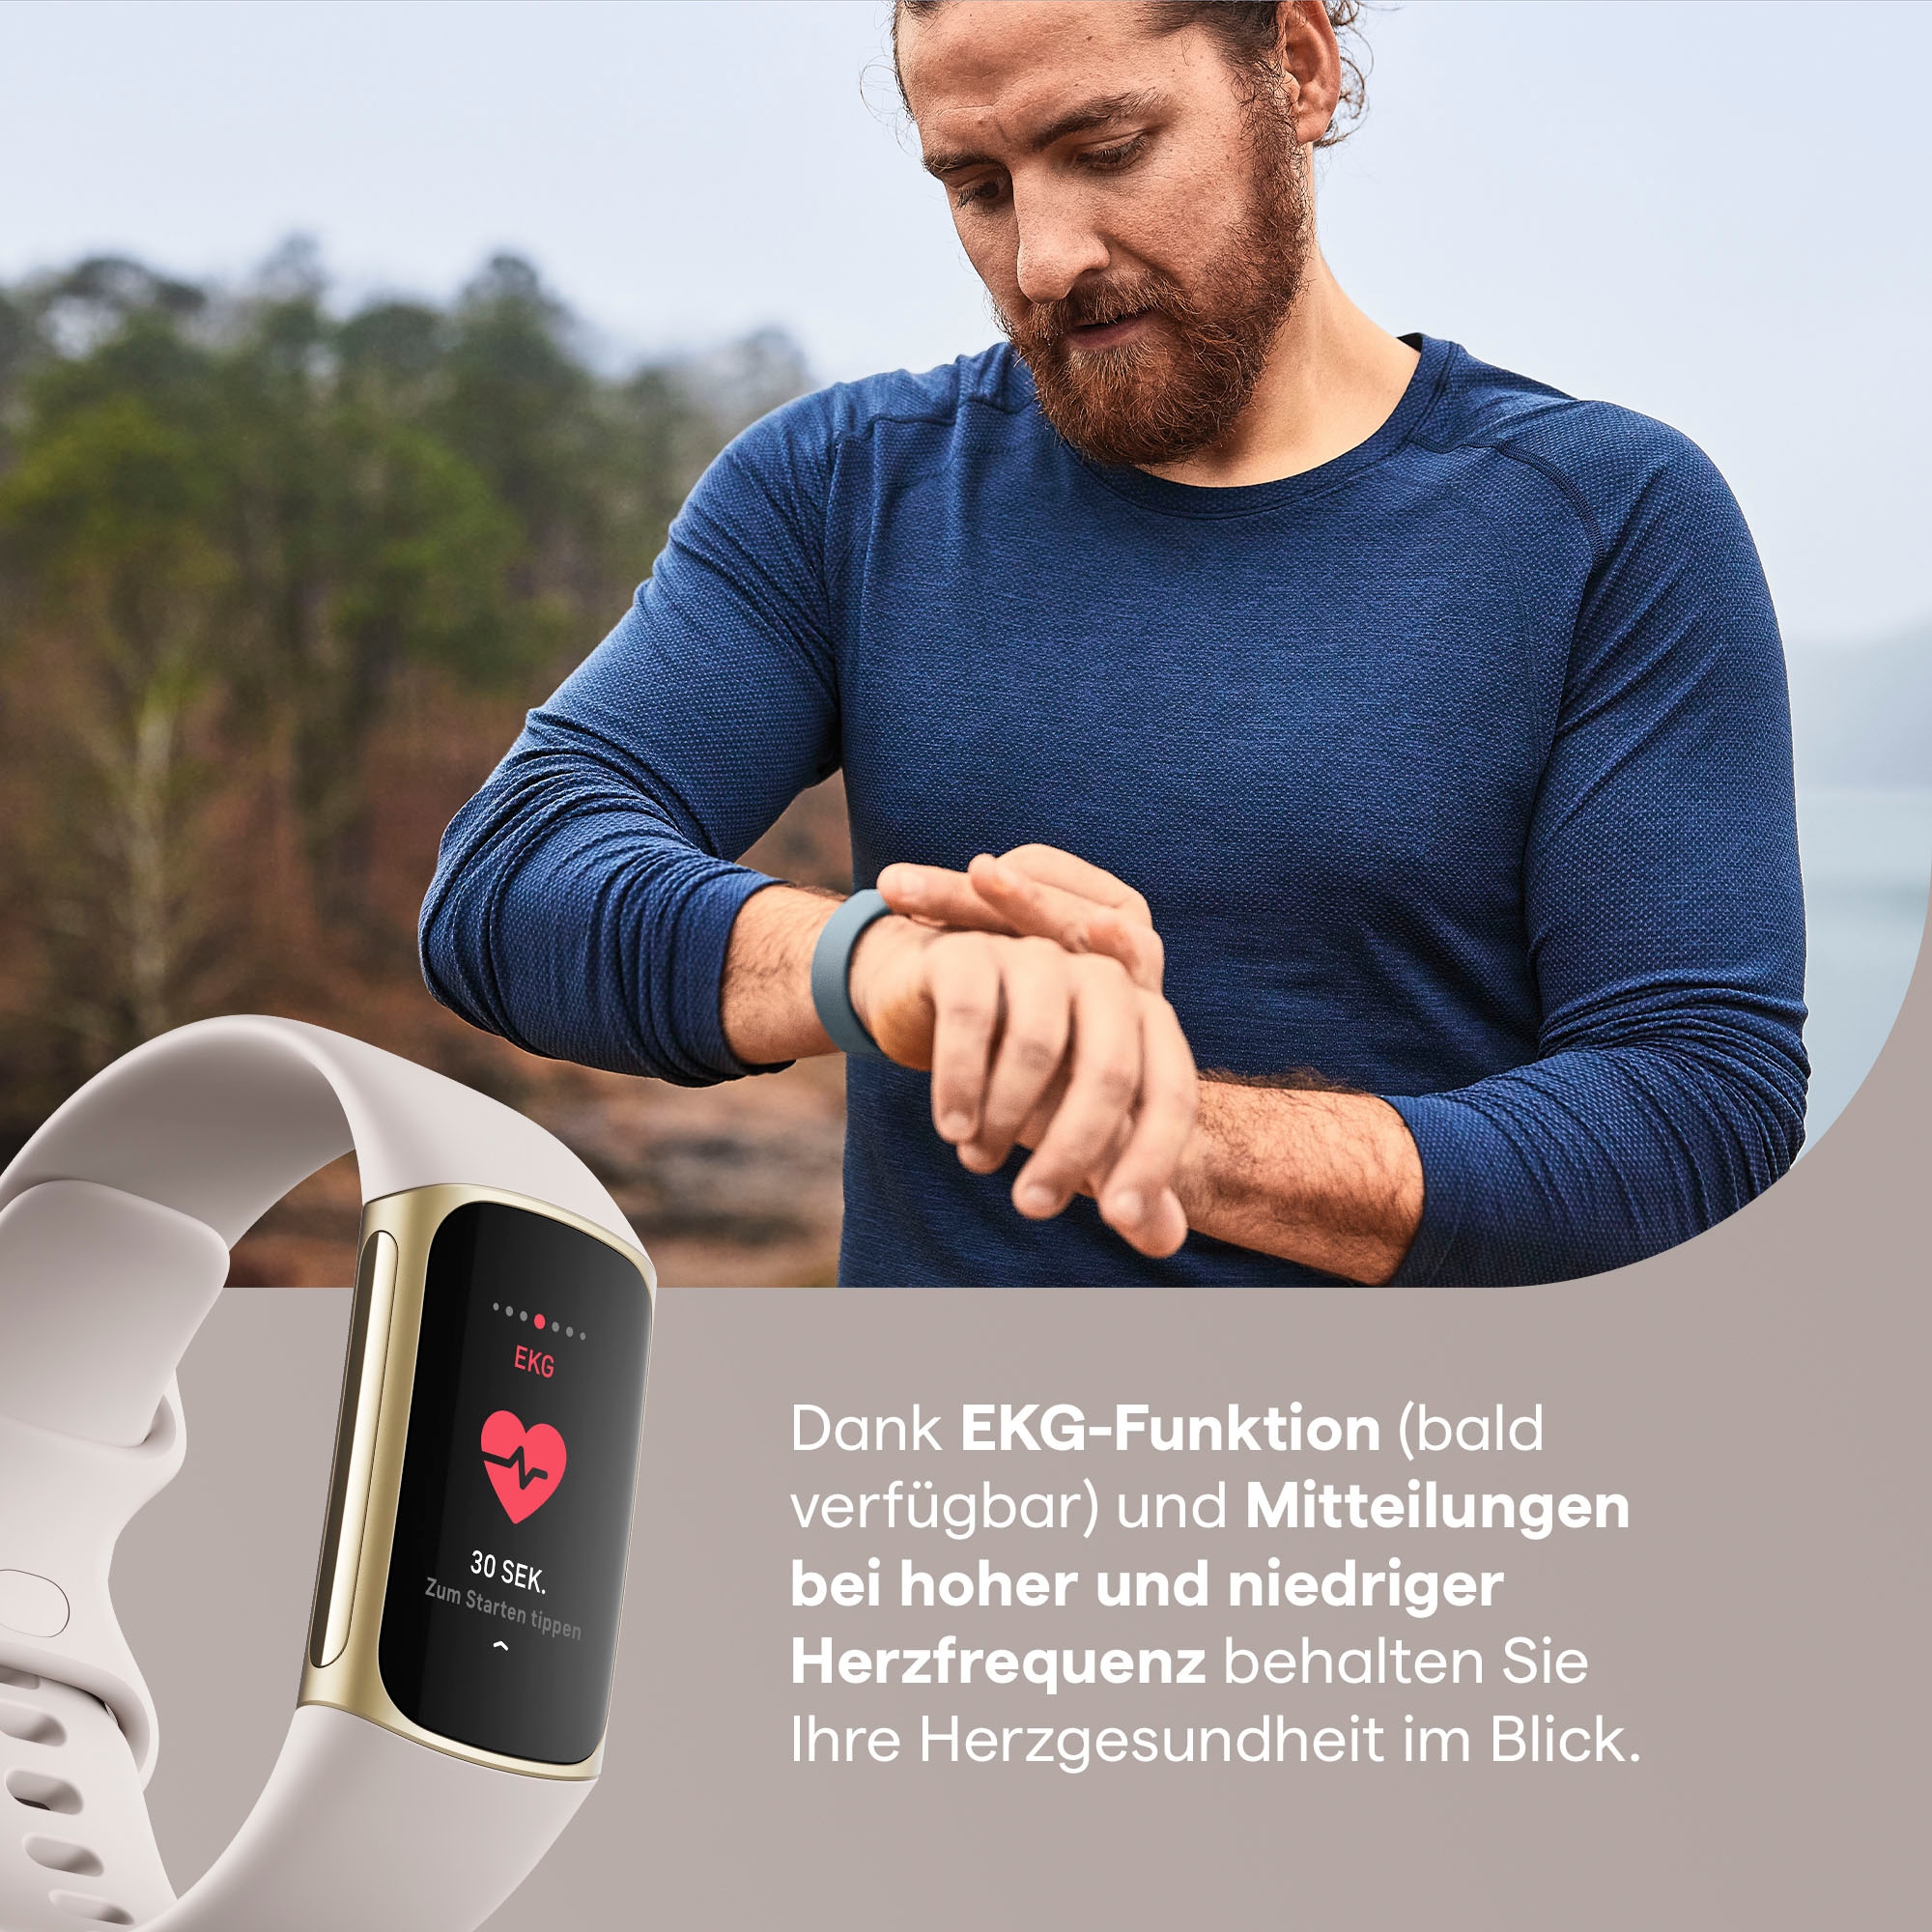 fitbit by Google Smartwatch »Charge kaufen bei jetzt 6 5«, Premium) OTTO Monate Fitbit (FitbitOS5 inkl